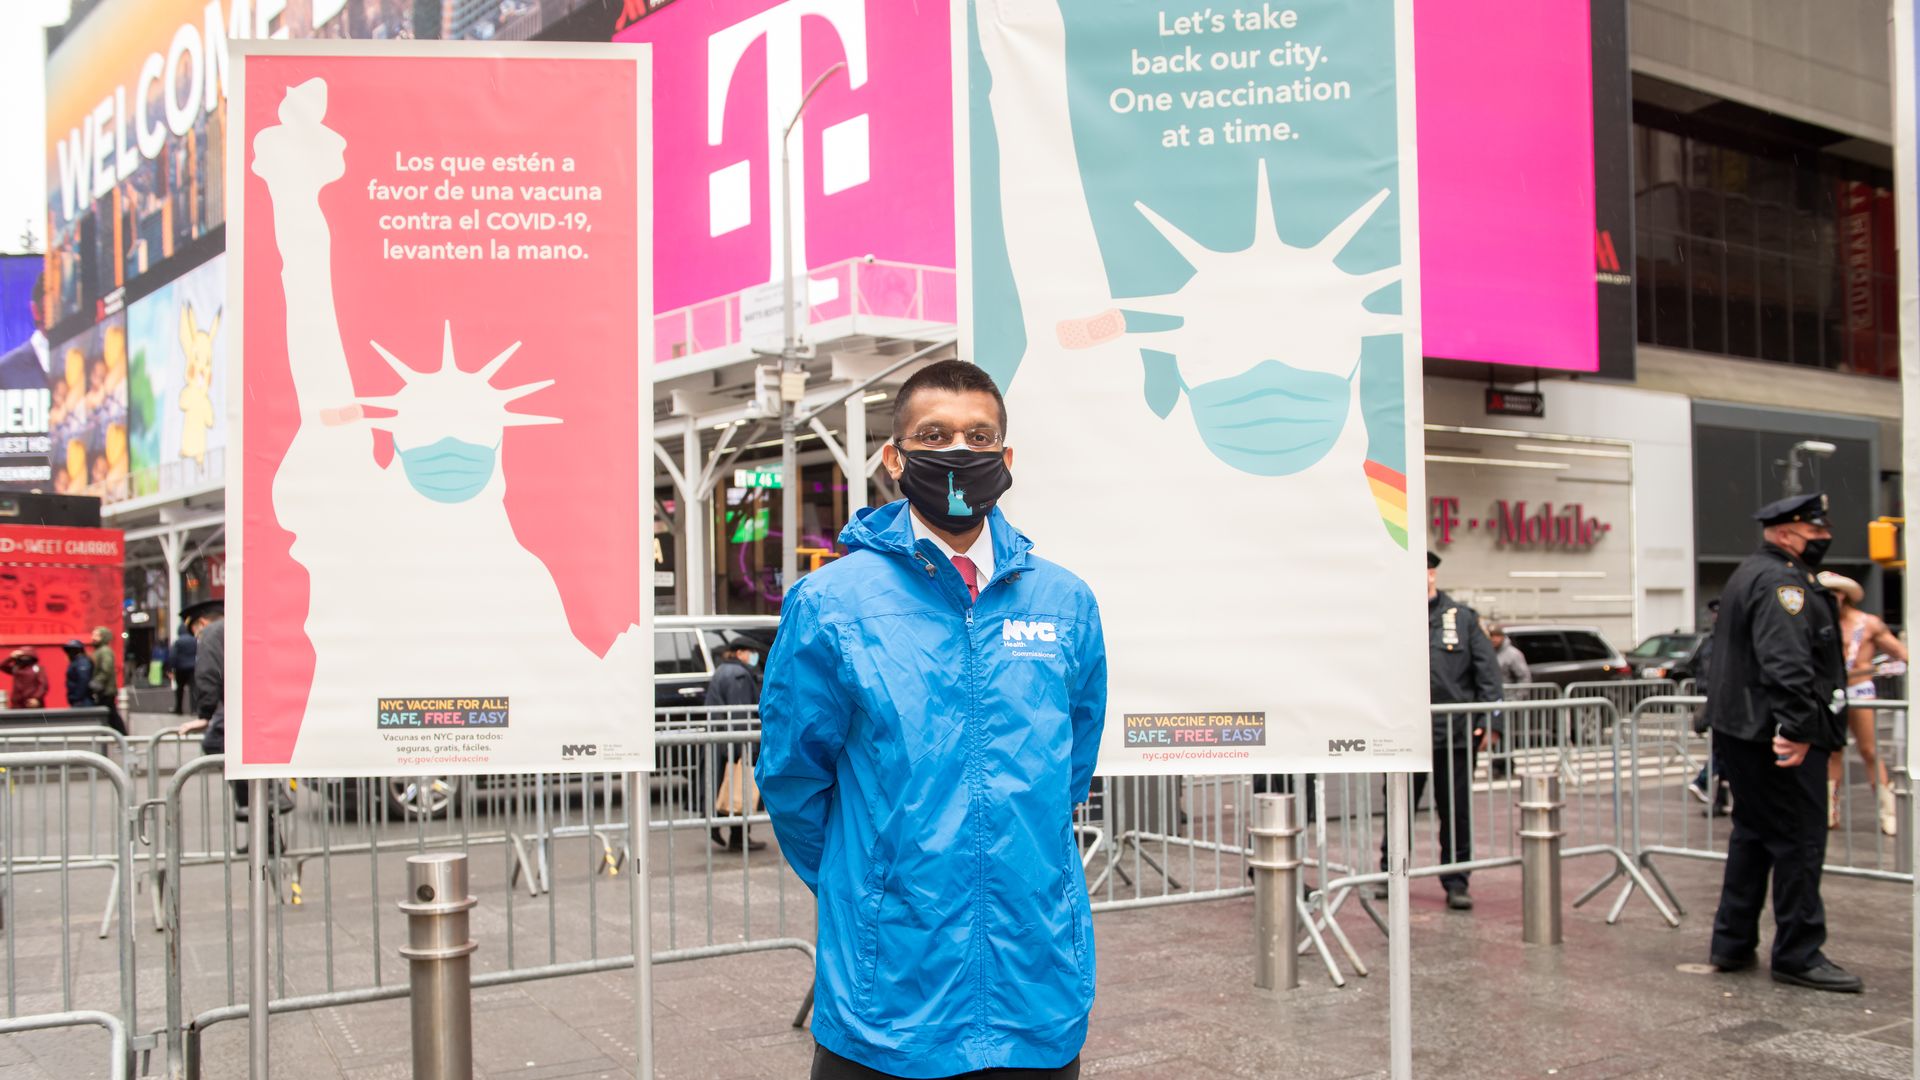  New York City Department of Health CommissionerDave Chokshi attends the opening of a vaccination center for Broadway workers in Times Square on April 12, 2021 in New York City. 